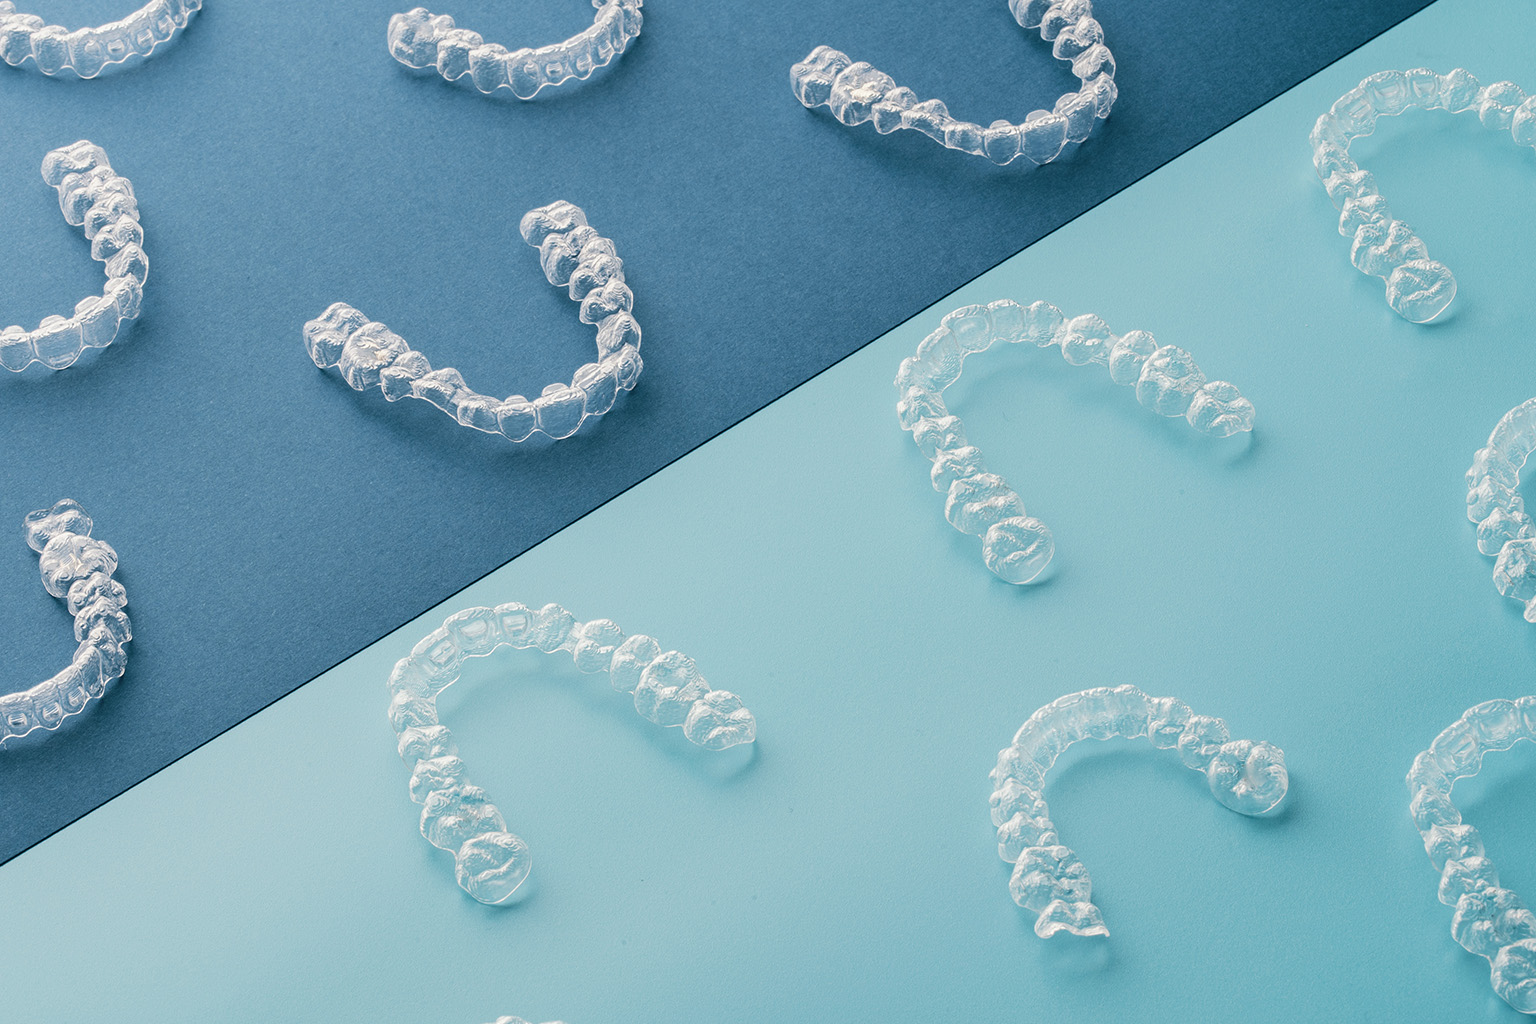 many clear aligners laying on a blue surface